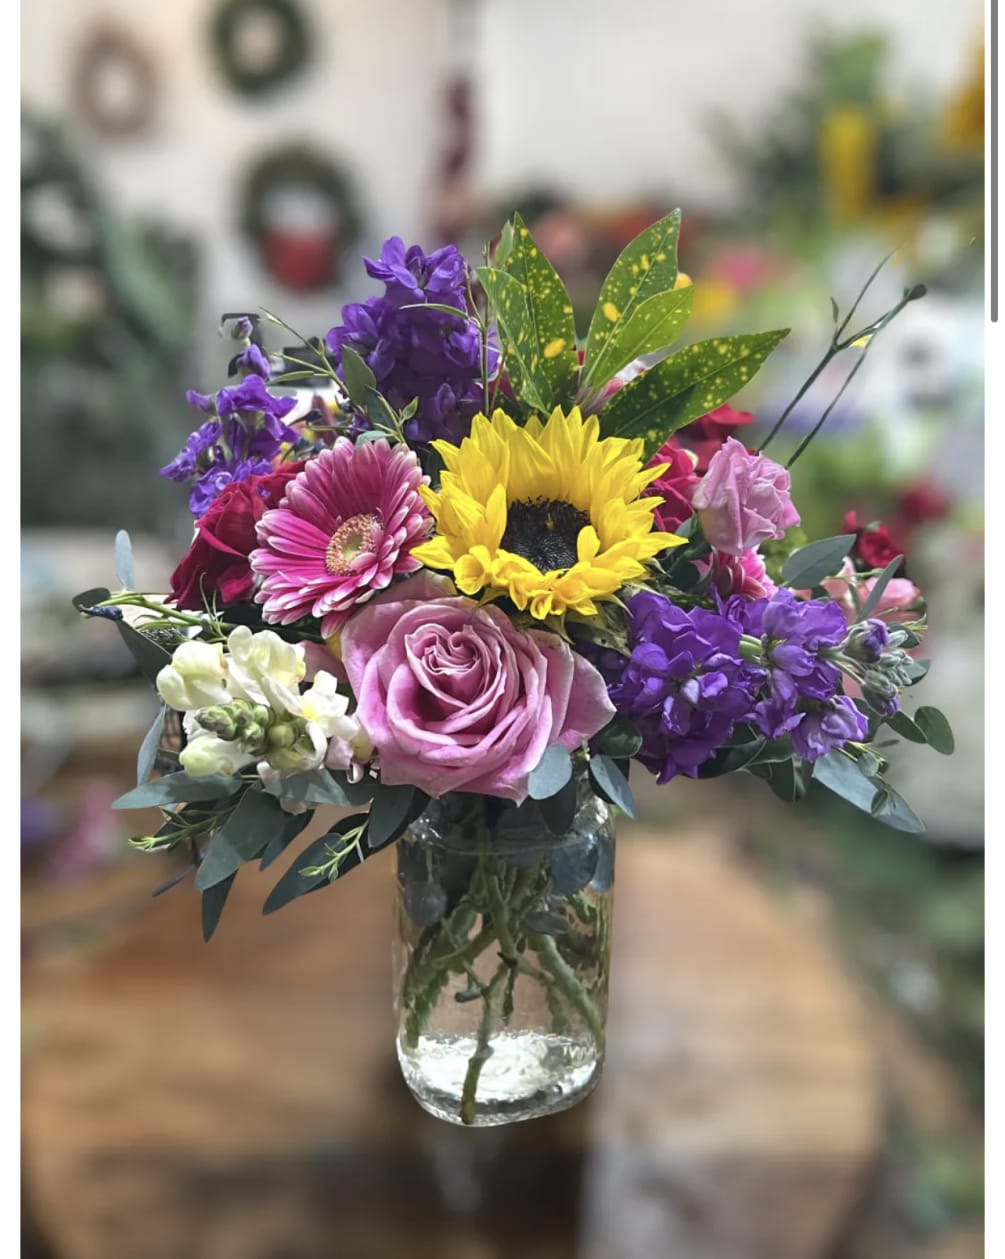 A beautiful bouquet of blooms that evokes a big smile! This arrangement